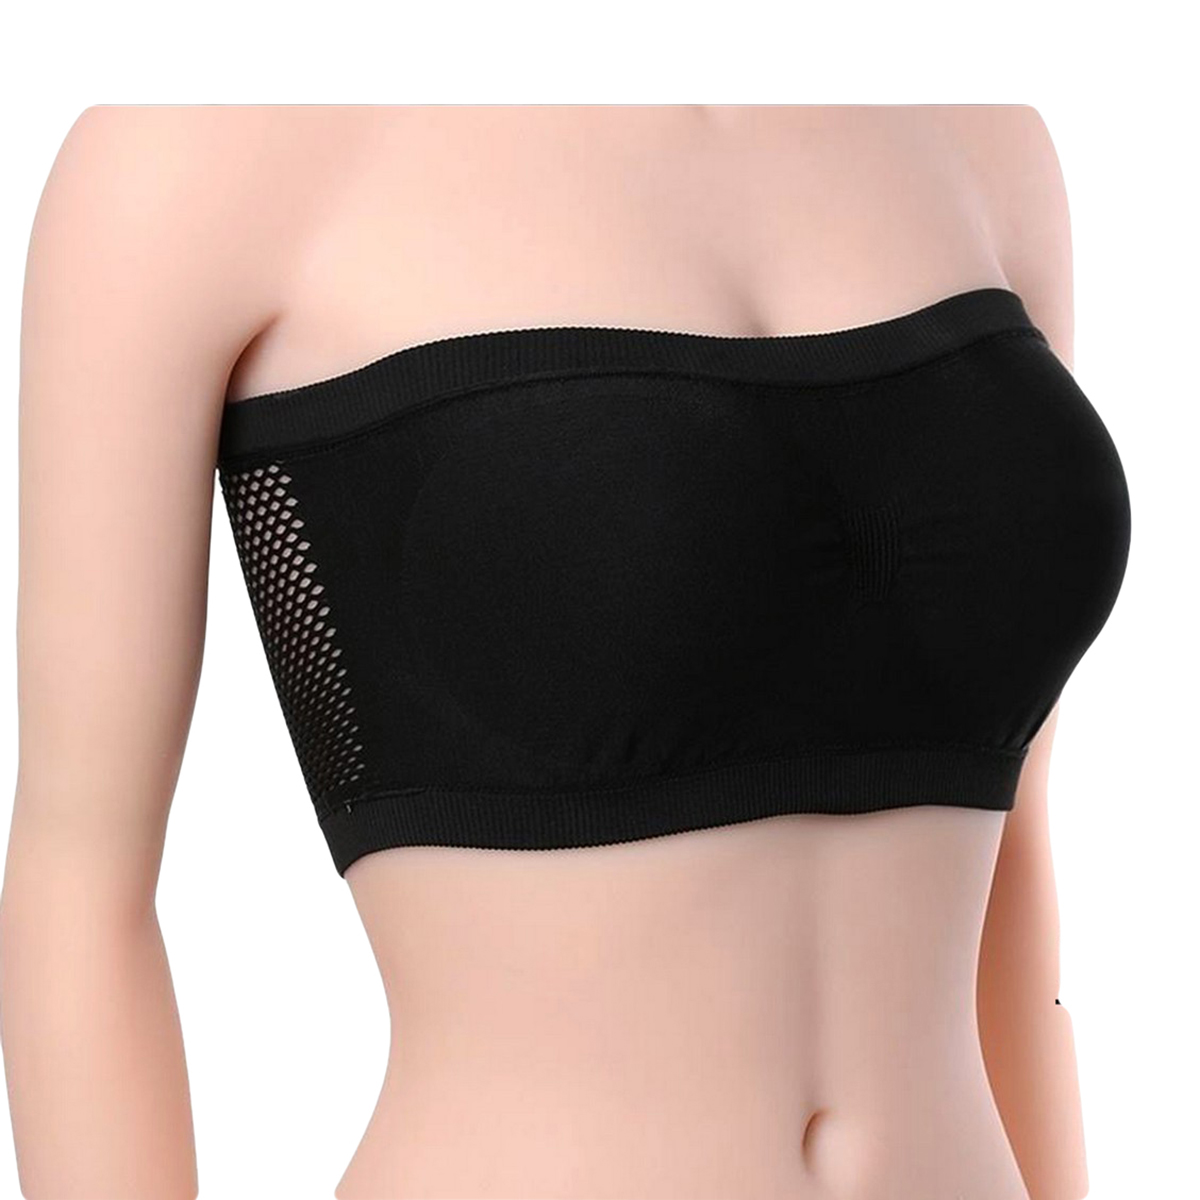 Maternity High Waisted Seamless Belly Support Belt for Tummy